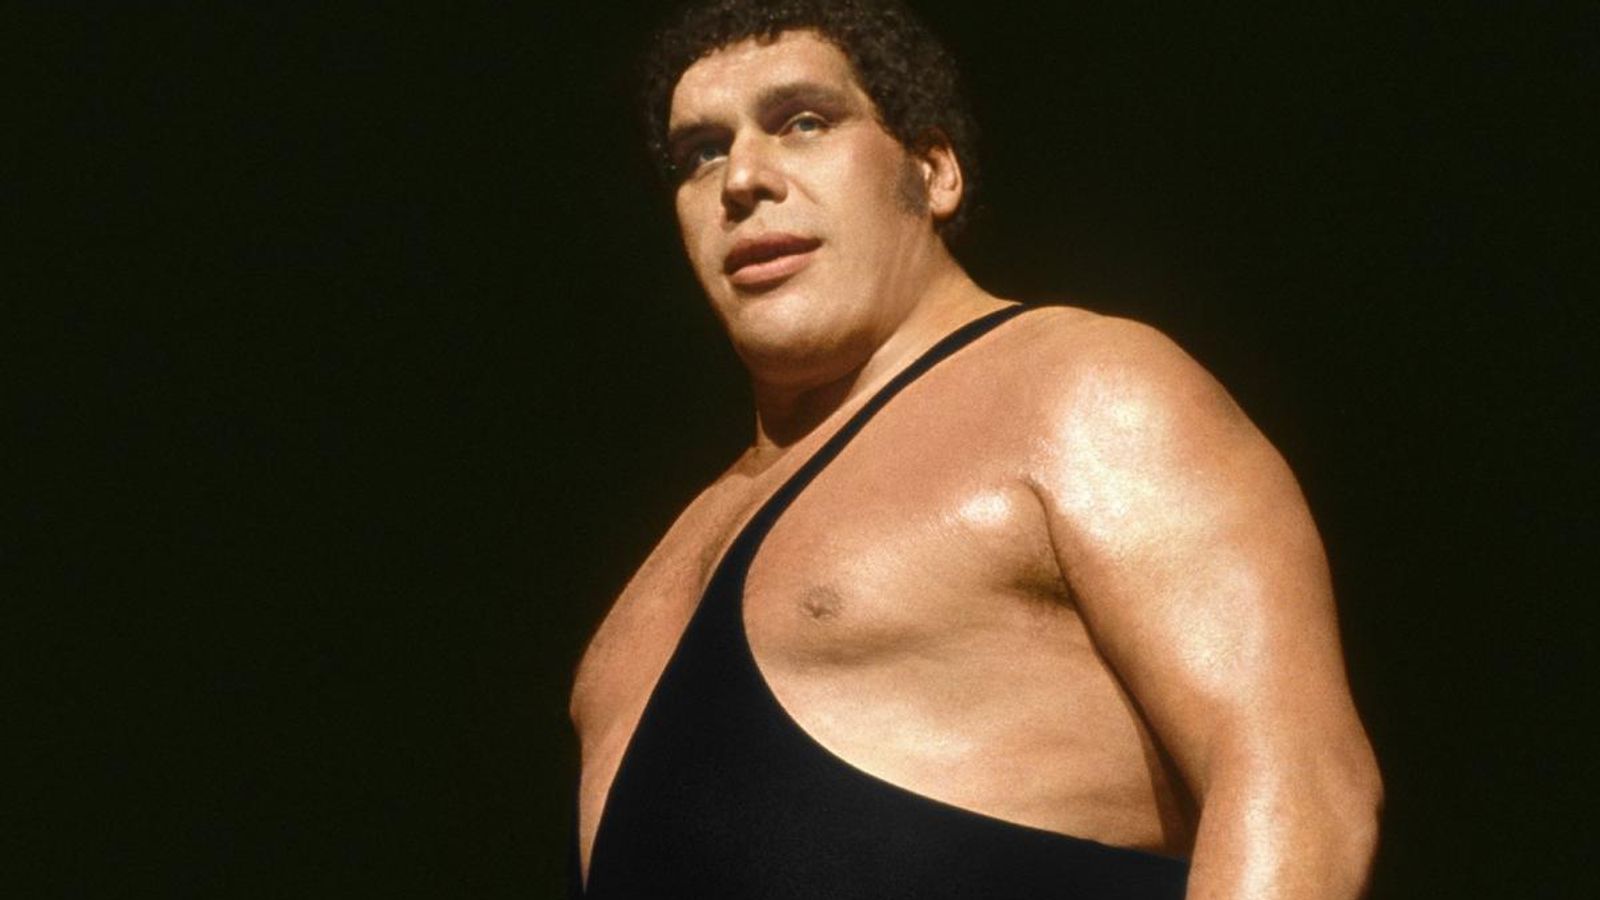 Andre The Giant's unique life story comes to Sky Documentaries